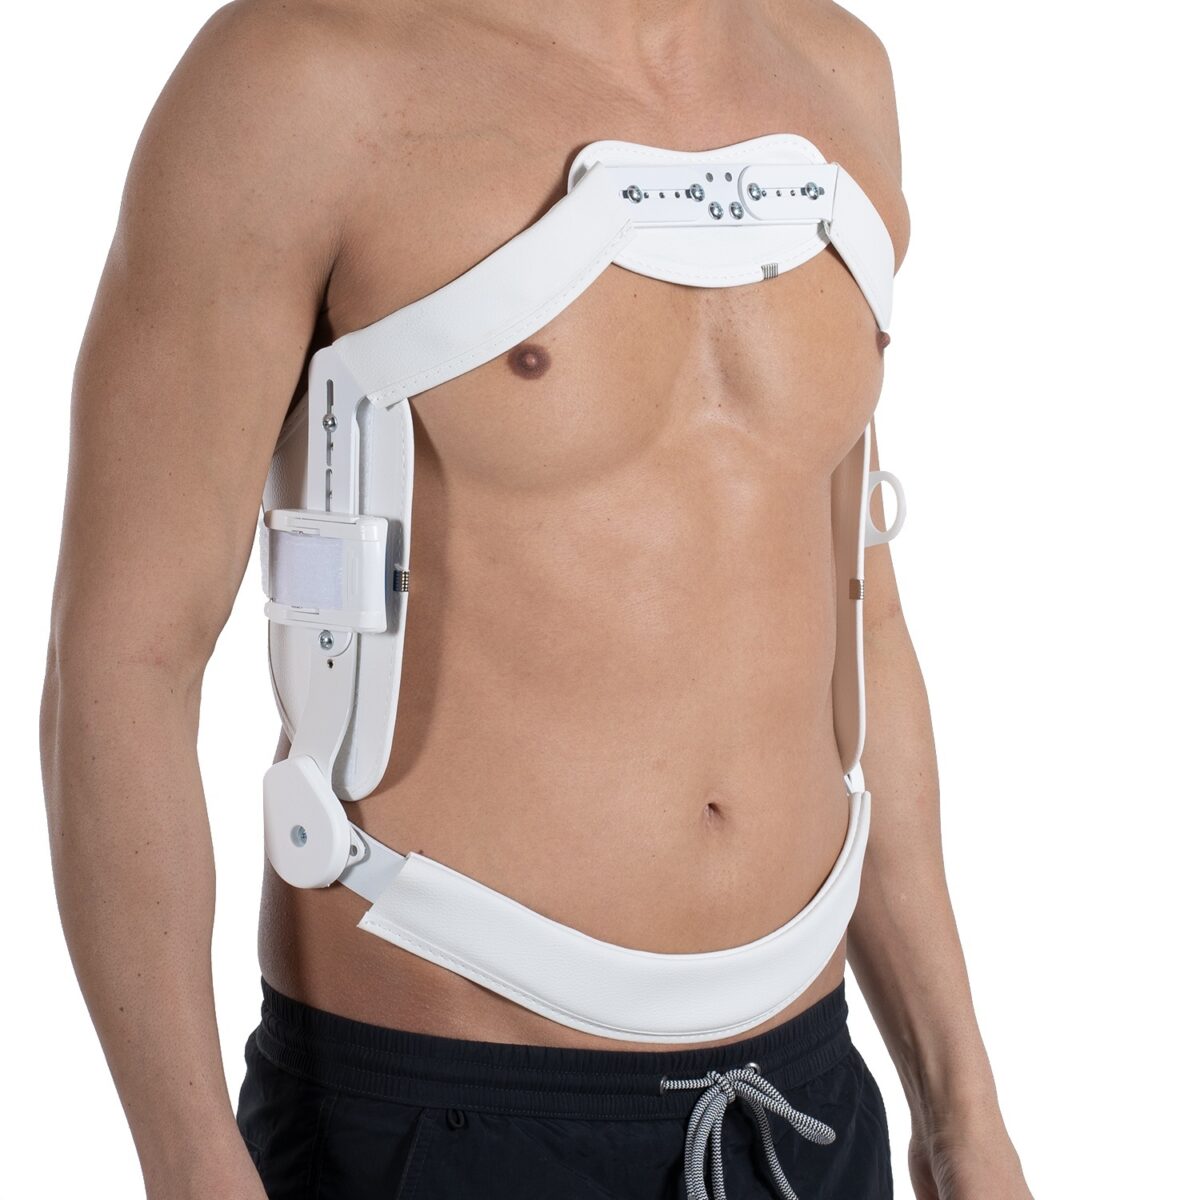 wingmed orthopedic equipments W431 dynamic hiperextension corset 54